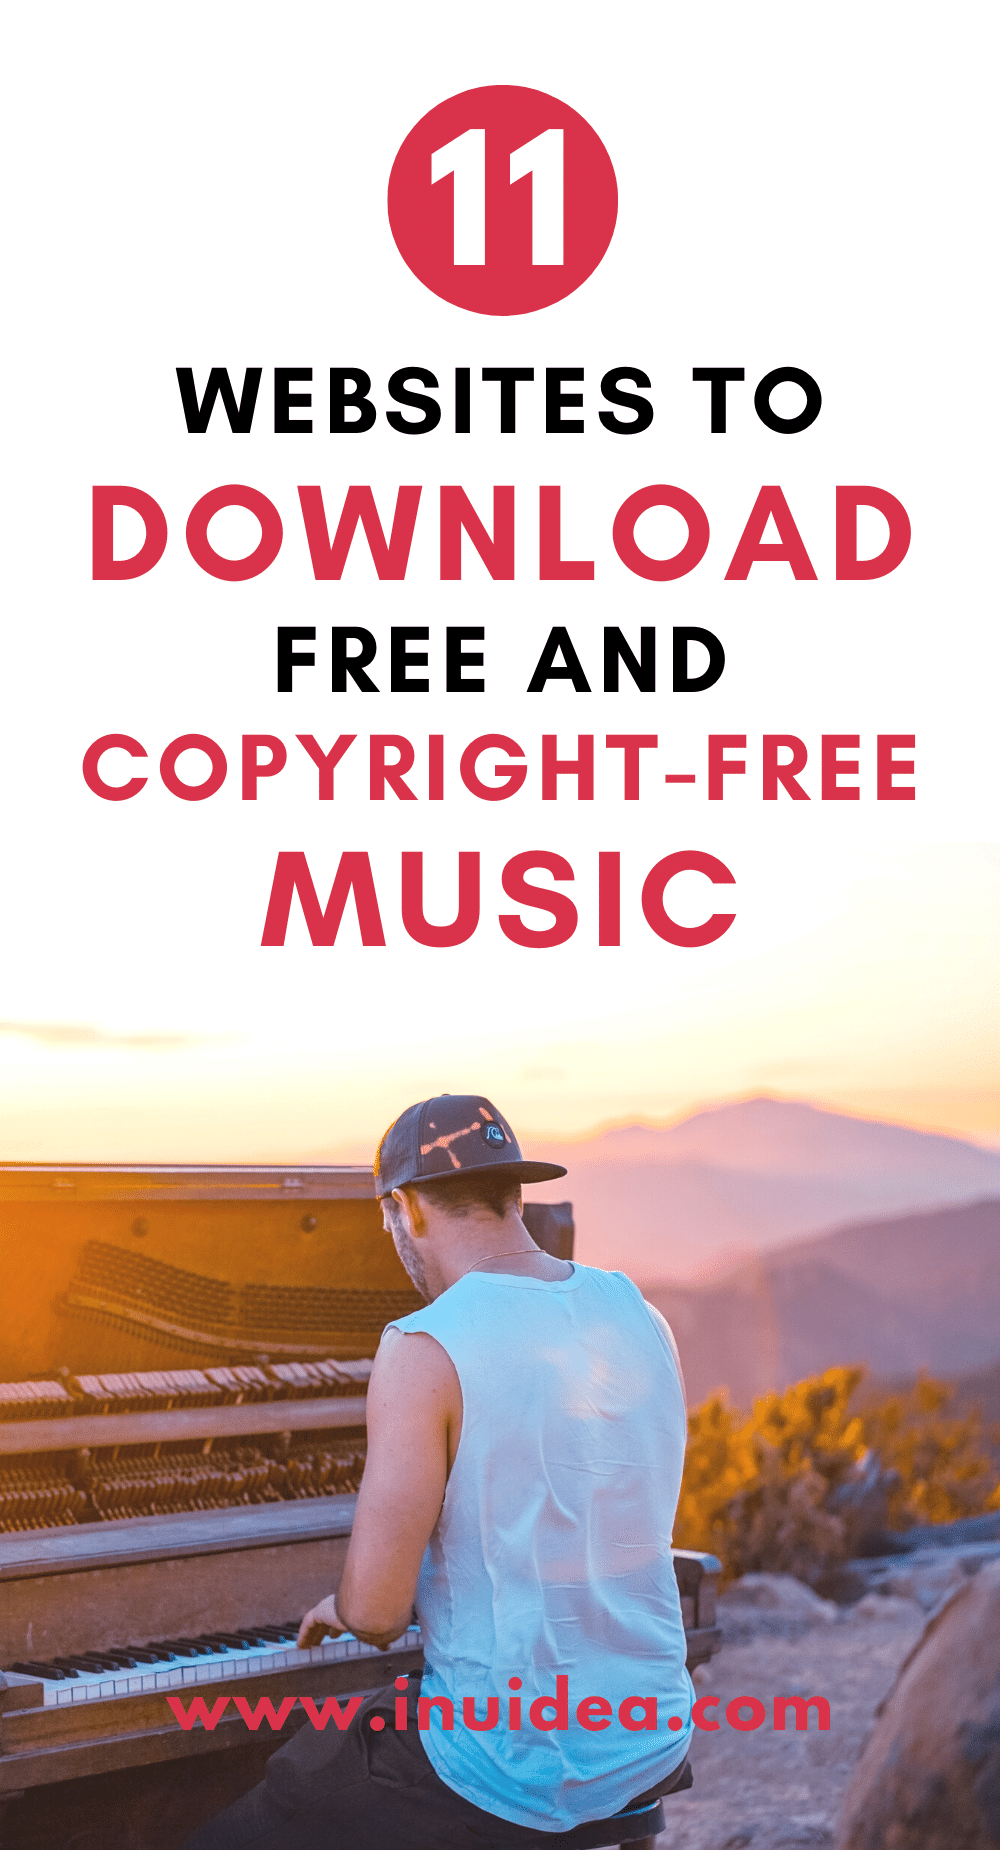 11 Websites to Download Free and Copyright-Free Music